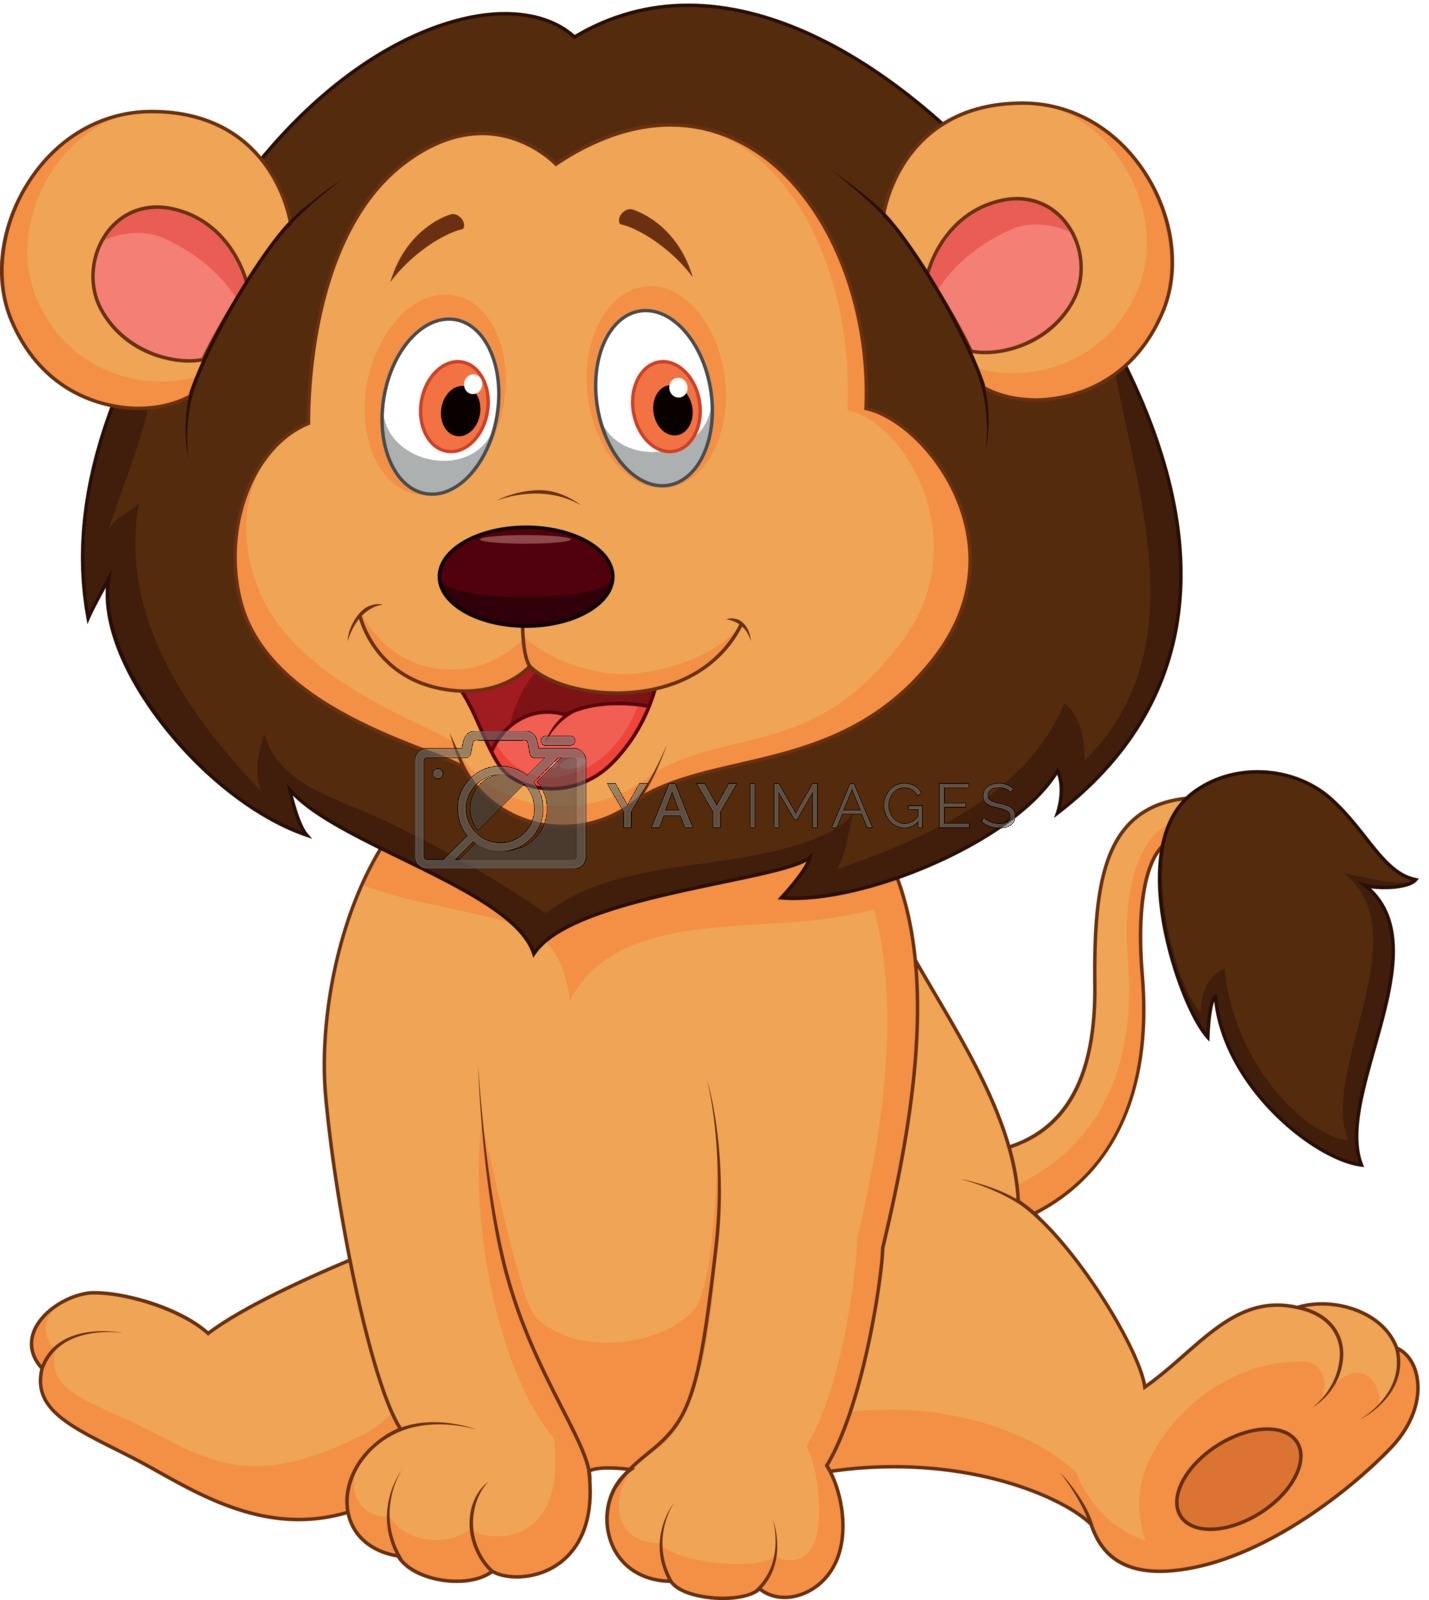 Royalty free image of Cute baby lion cartoon by tigatelu